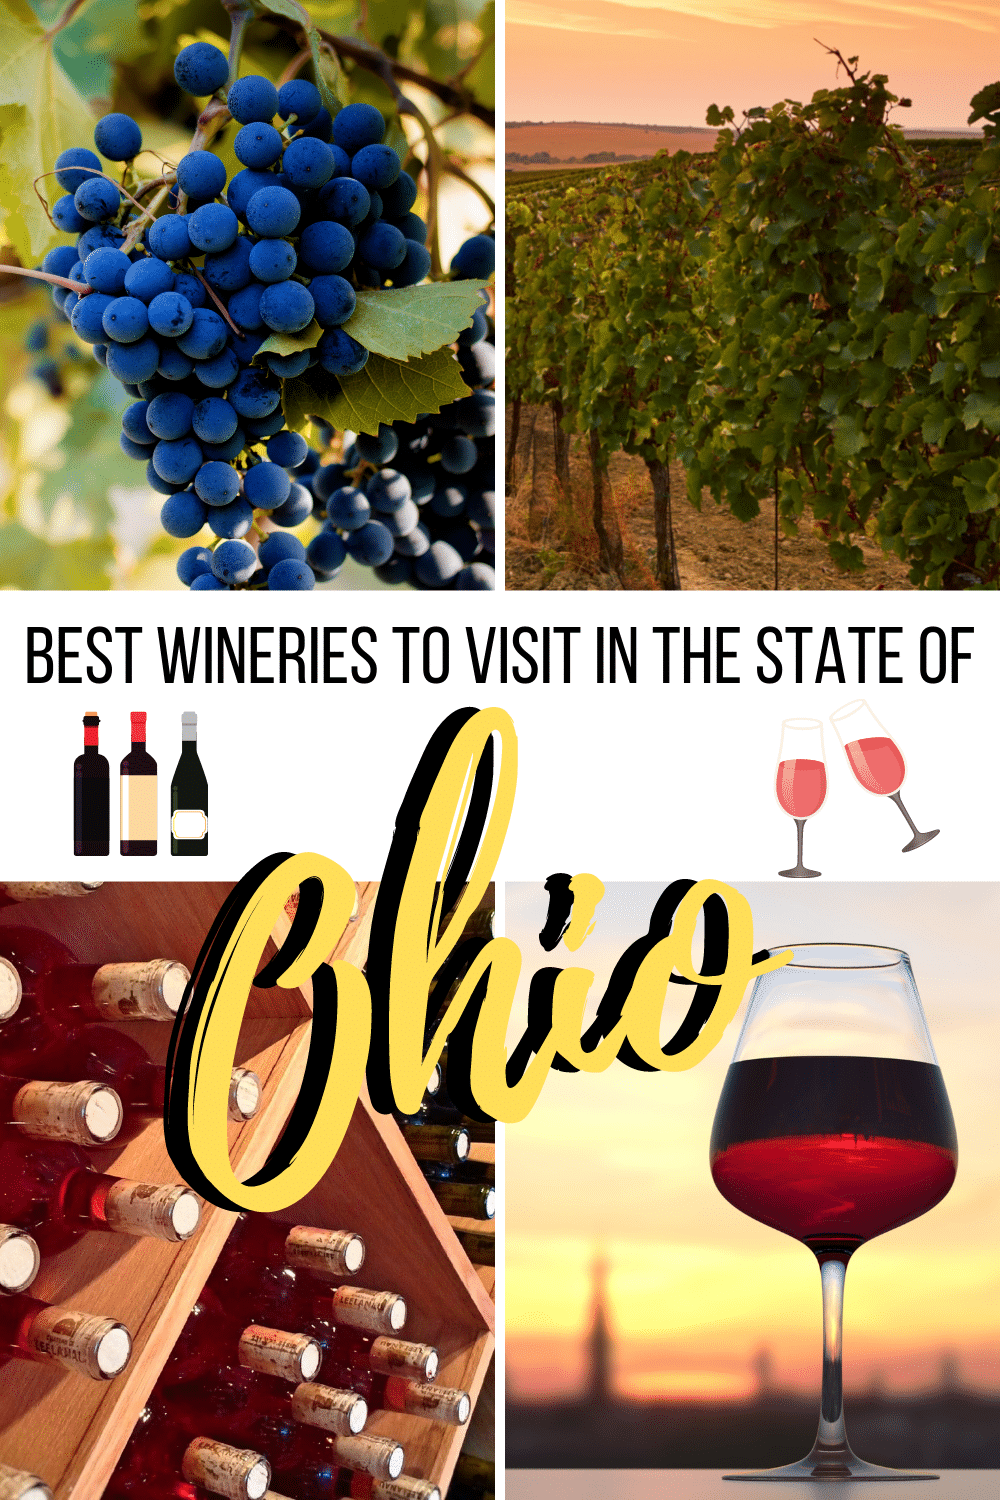 There are over 20+ wineries in Geneva Ohio. Plan a weekend of fun, food and great wine at the wineries in Geneva Ohio! #ohiowine #ohiowineries #genevaohio #AshtabulaCounty